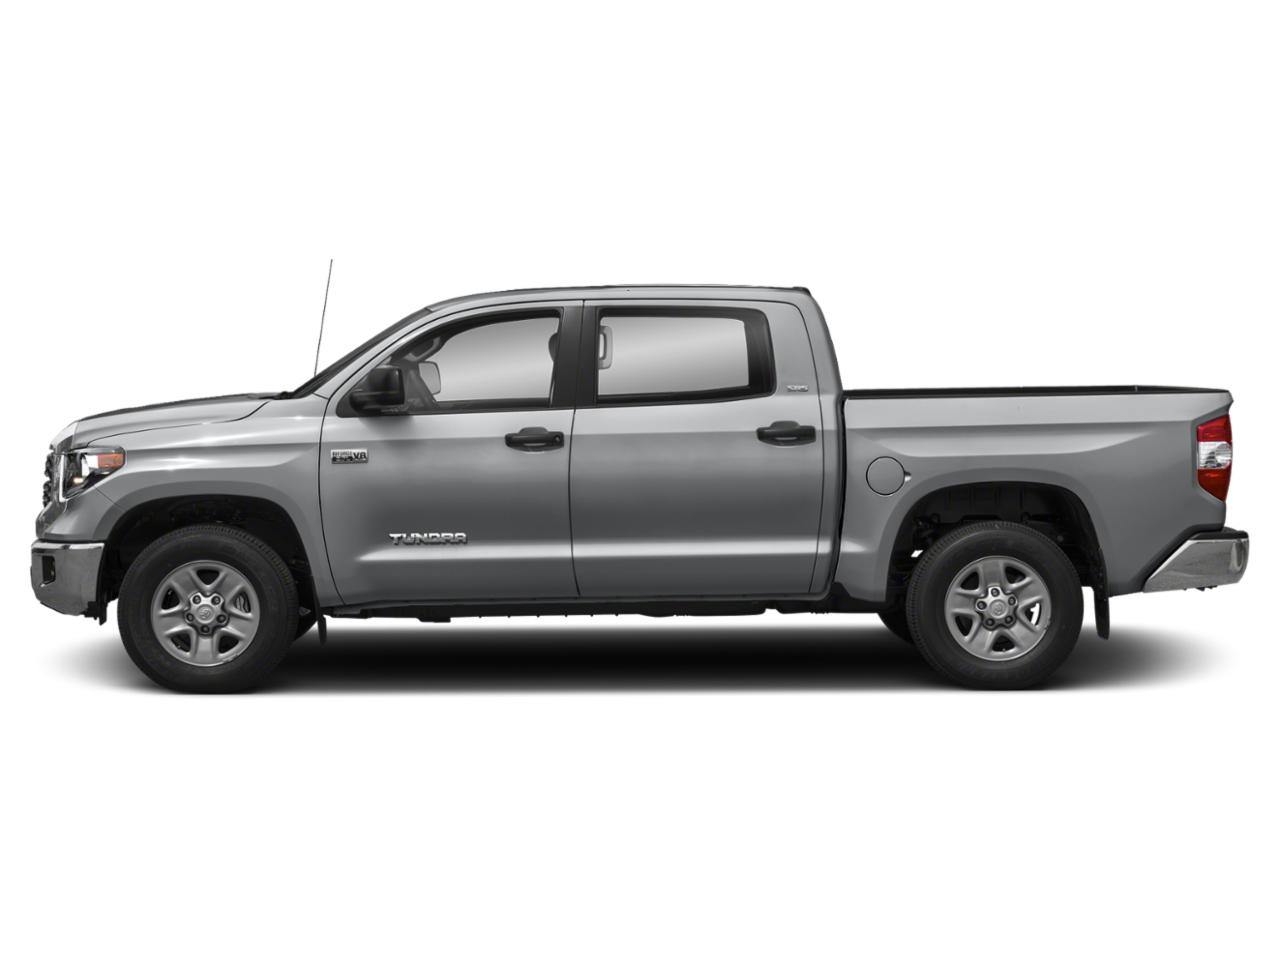 2019 Toyota Tundra 4WD Vehicle Photo in Pinellas Park , FL 33781